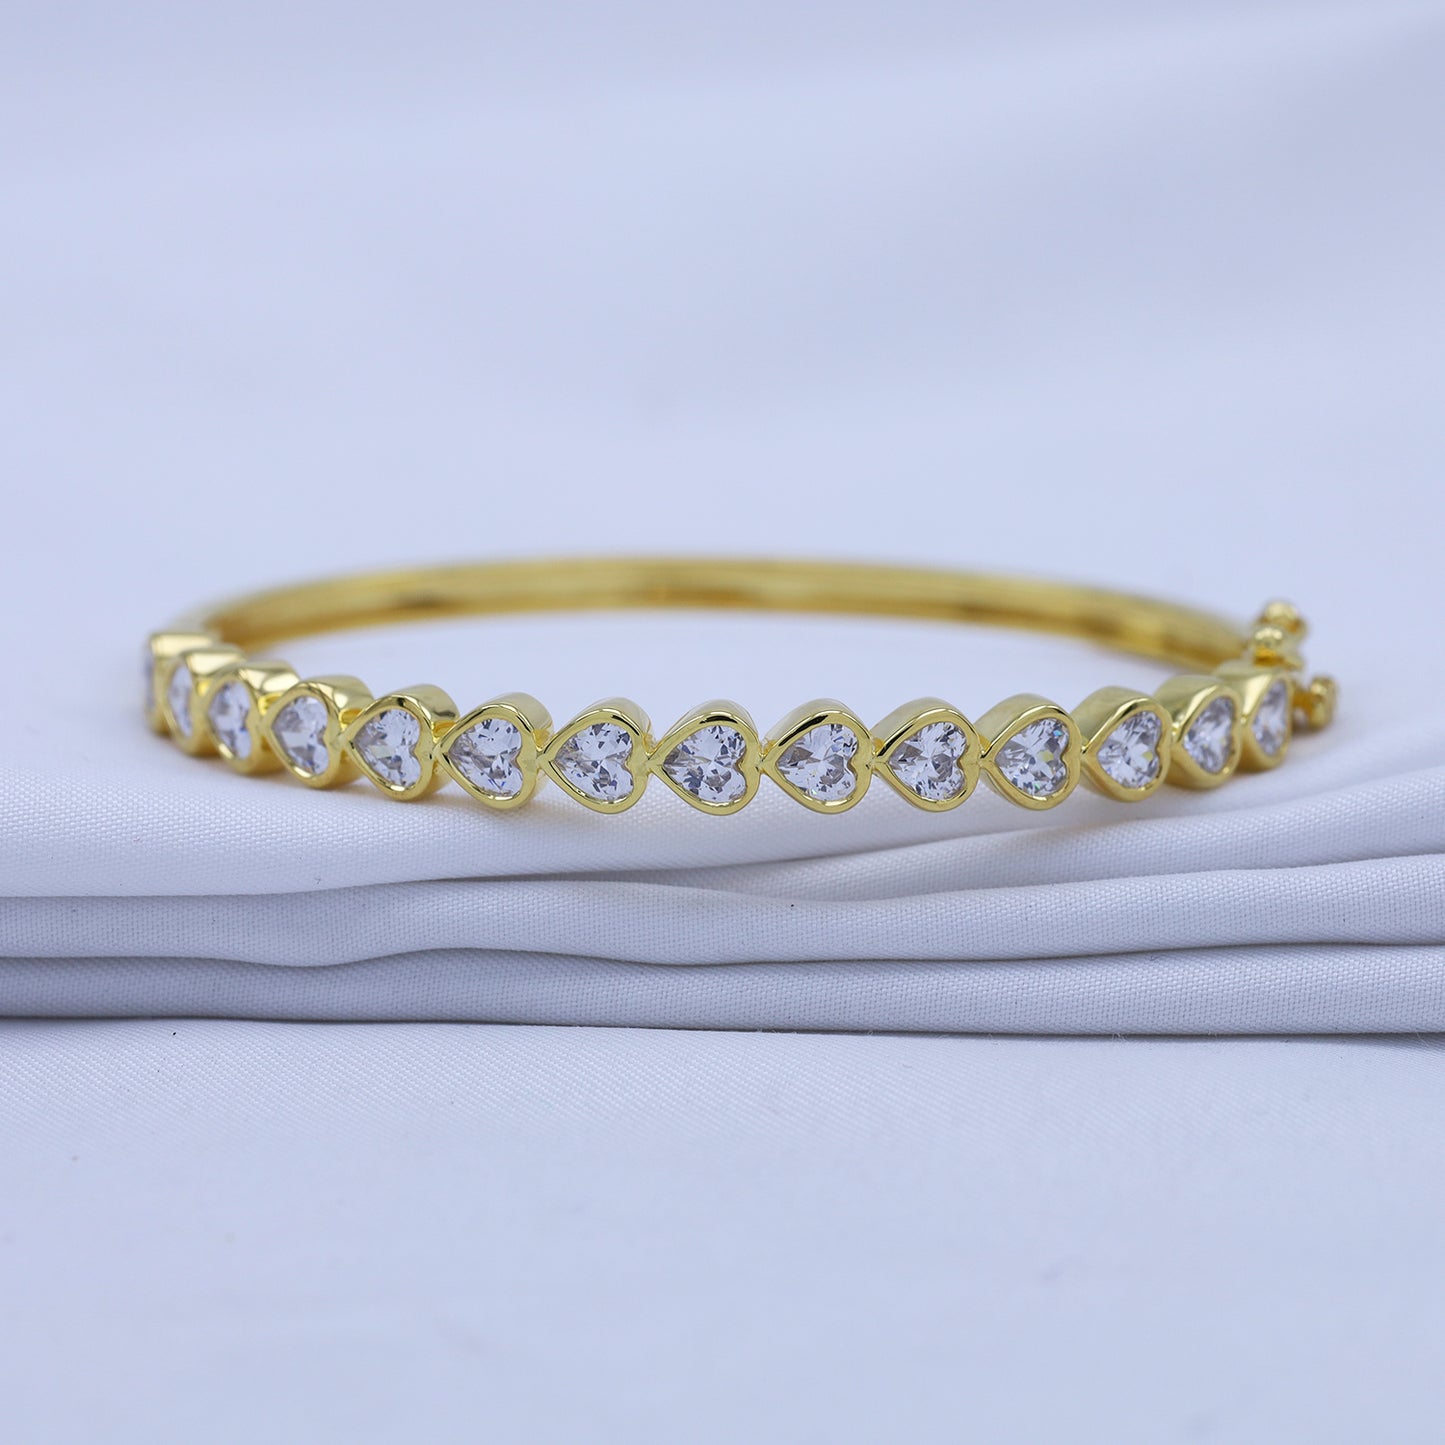 4MM Heart Shape White Cubic Zirconia Bangle Bracelet for Women In 14K Solid Gold Jewelry, Size : 6.50" To 8.00"